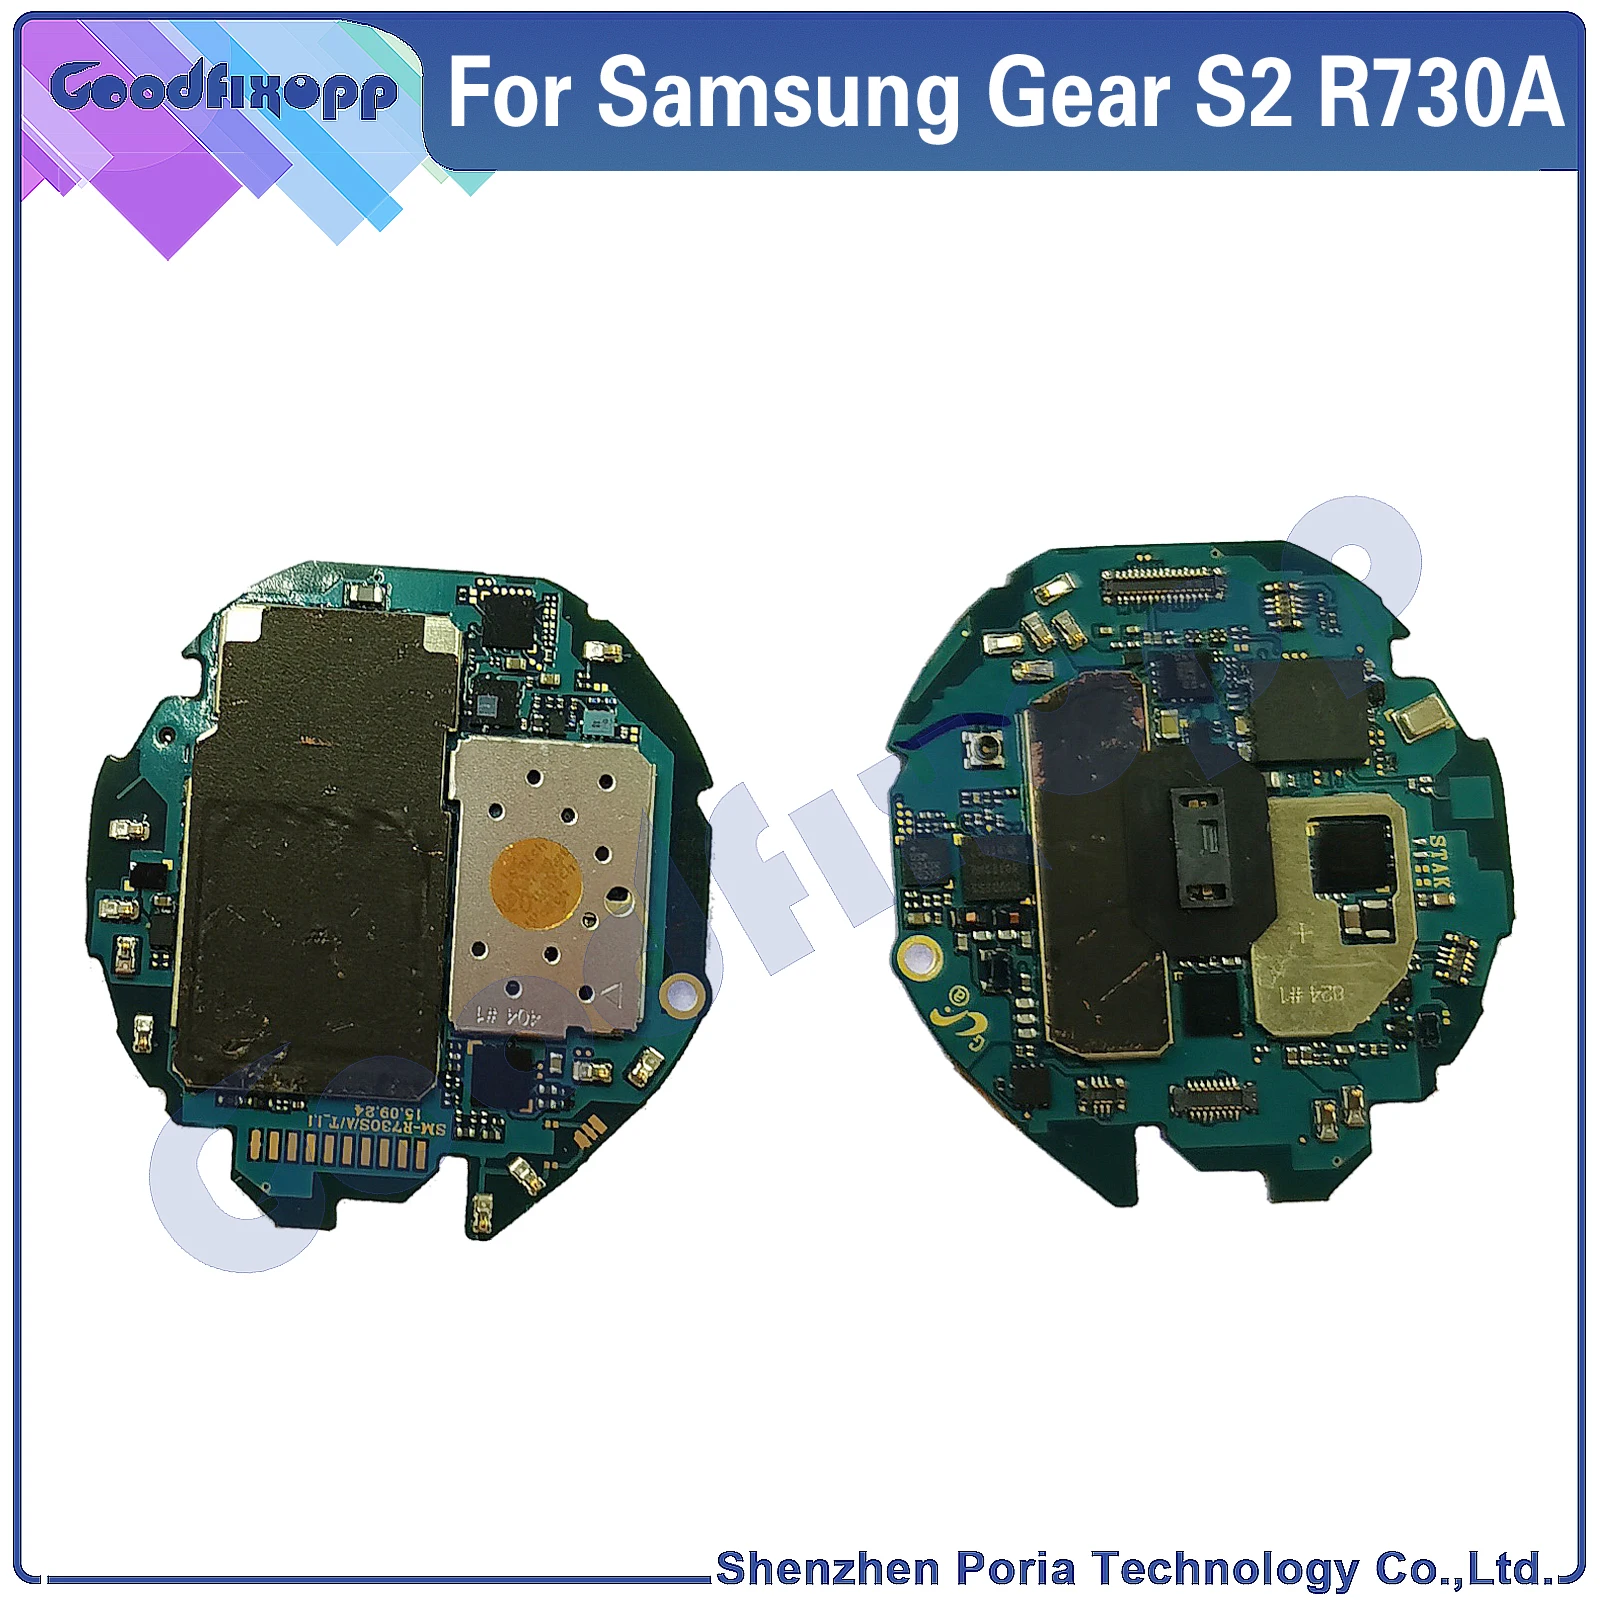 For Samsung Gear S2 R730 R730A SM-R730A Mainboard Motherboard Main Board Repair Parts Replacement